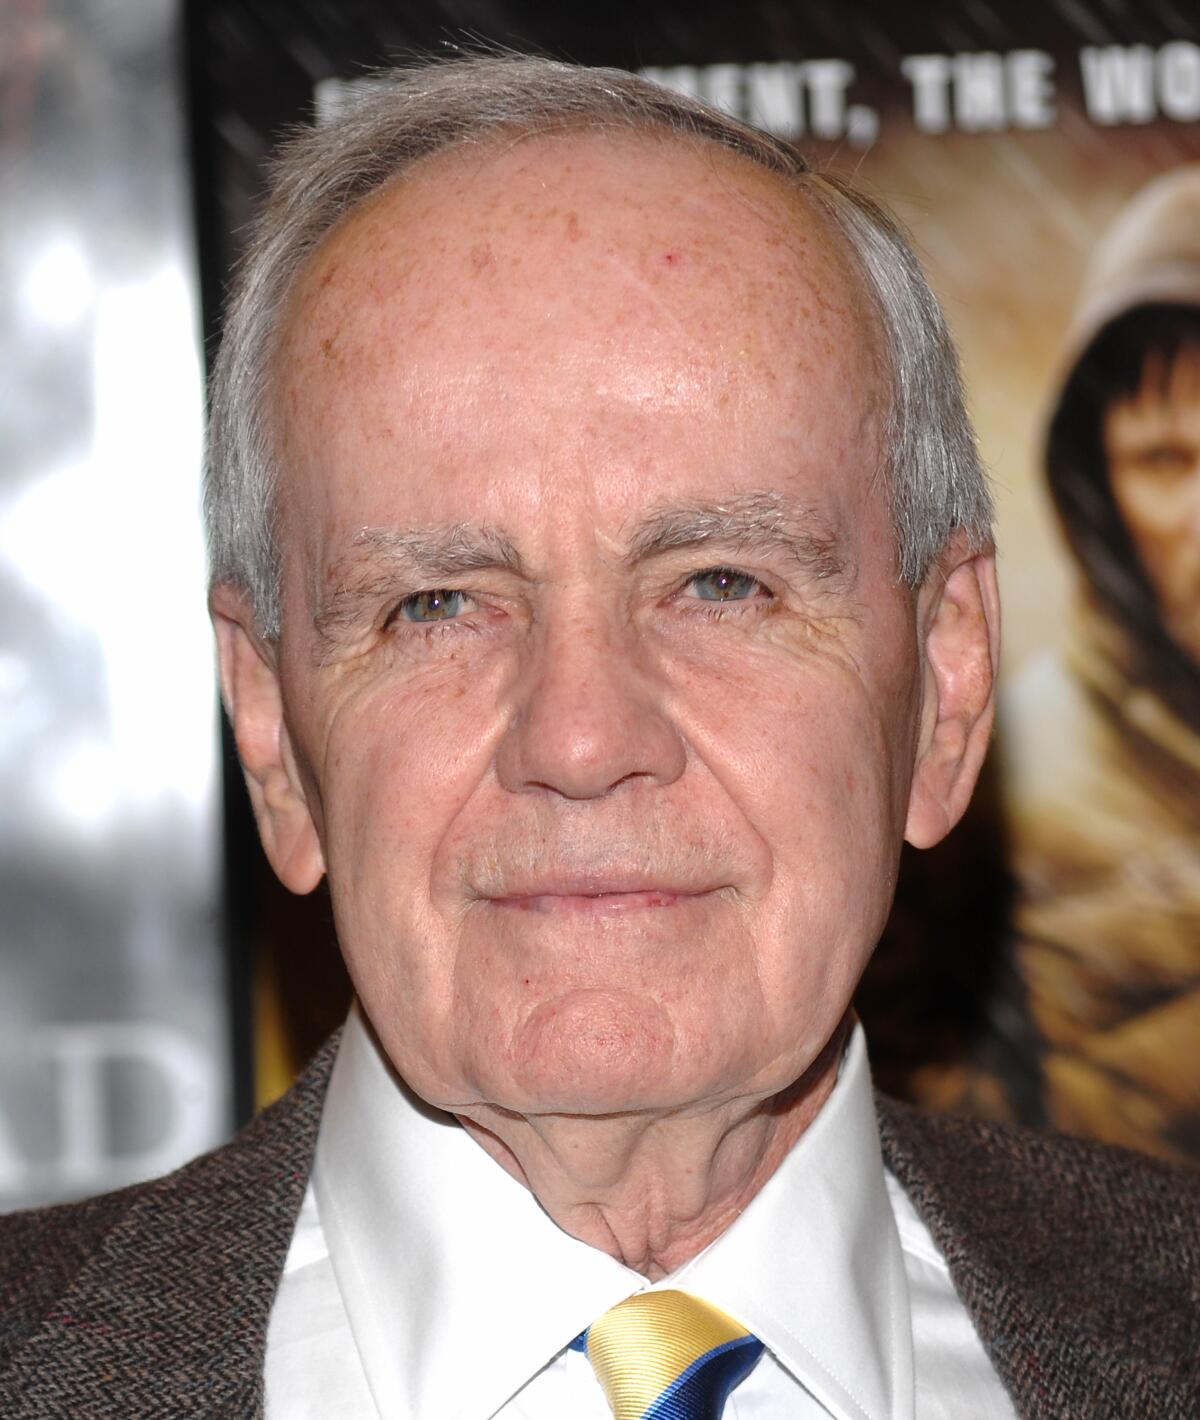 Cormac McCarthy was the great novelist of the American West